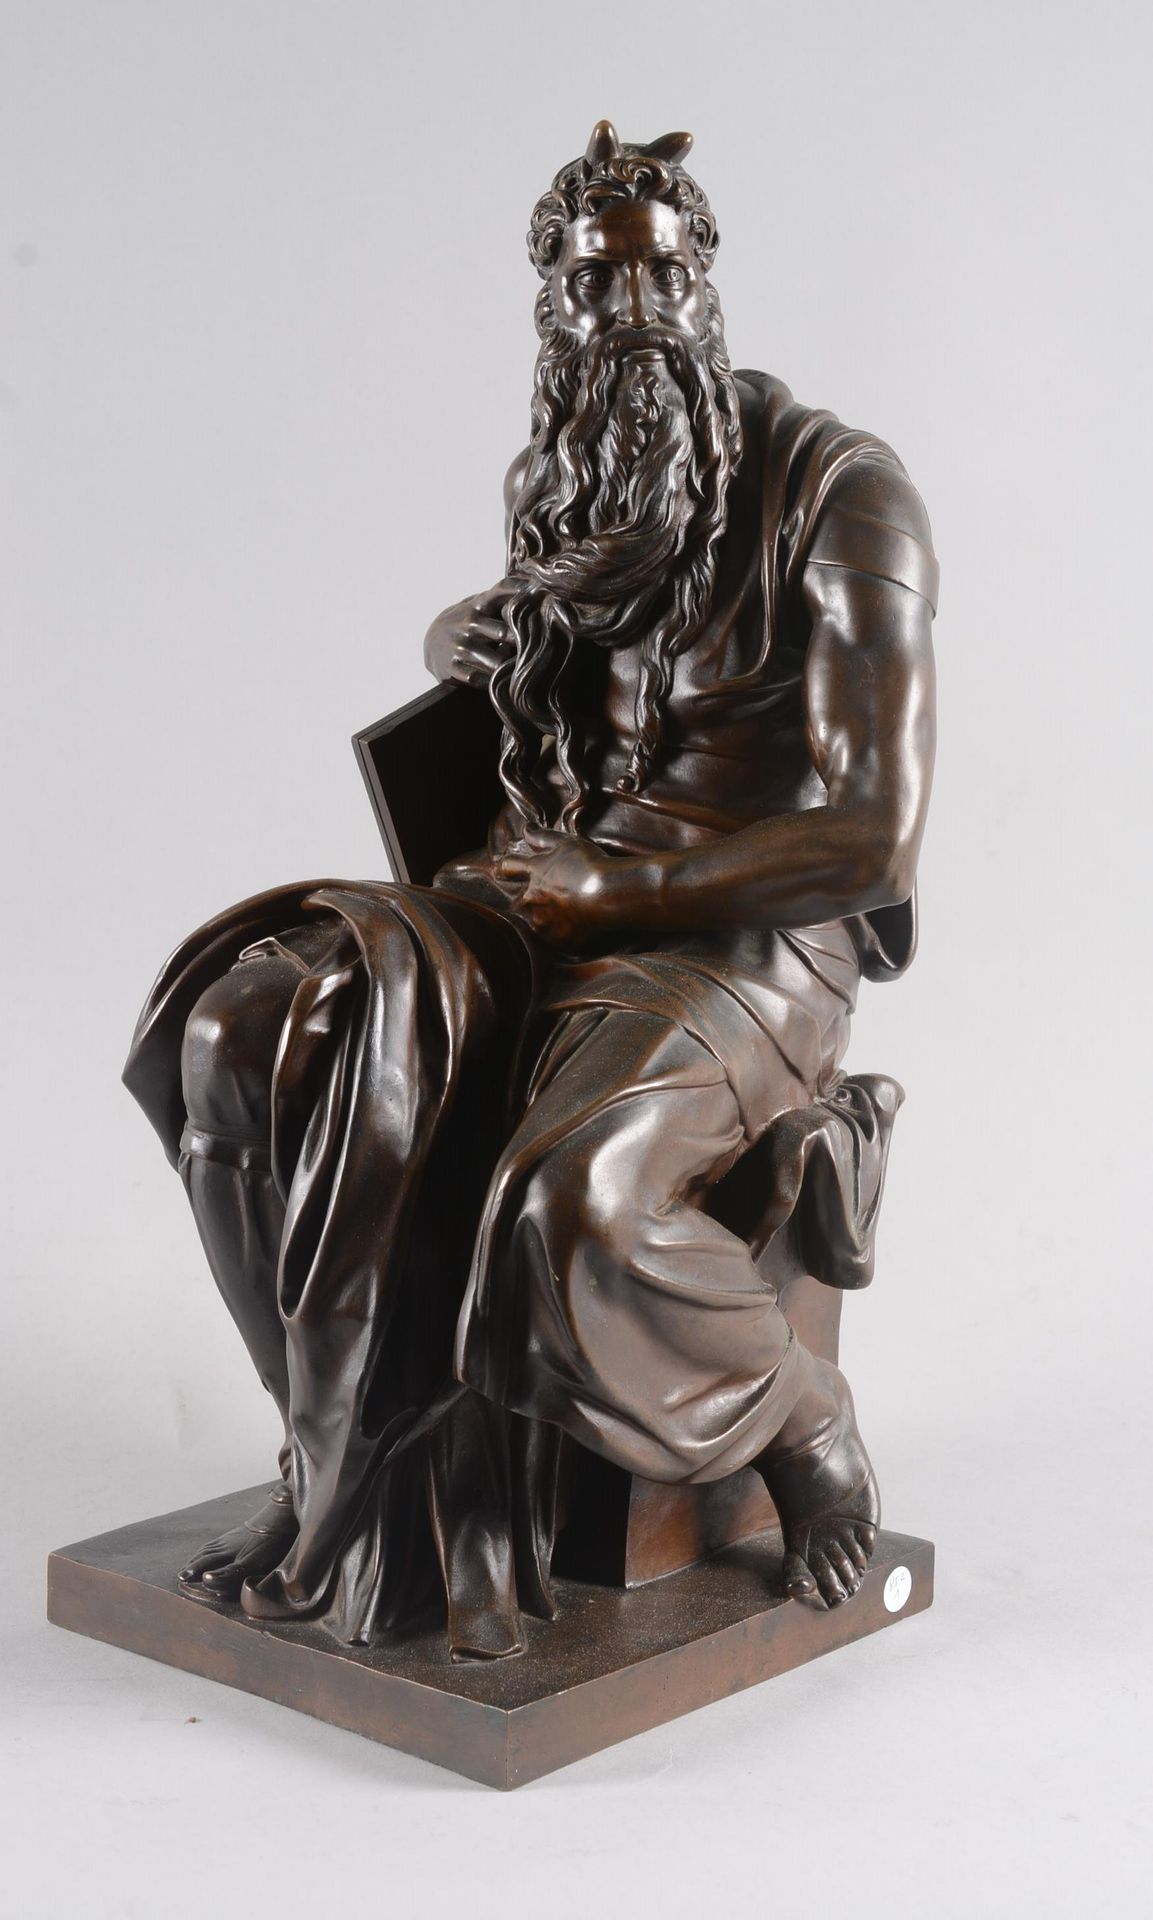 D’après MICHEL-ANGE (1475-1564) After MICHEL-ANGE (1475-1564)

Moses holding the&hellip;